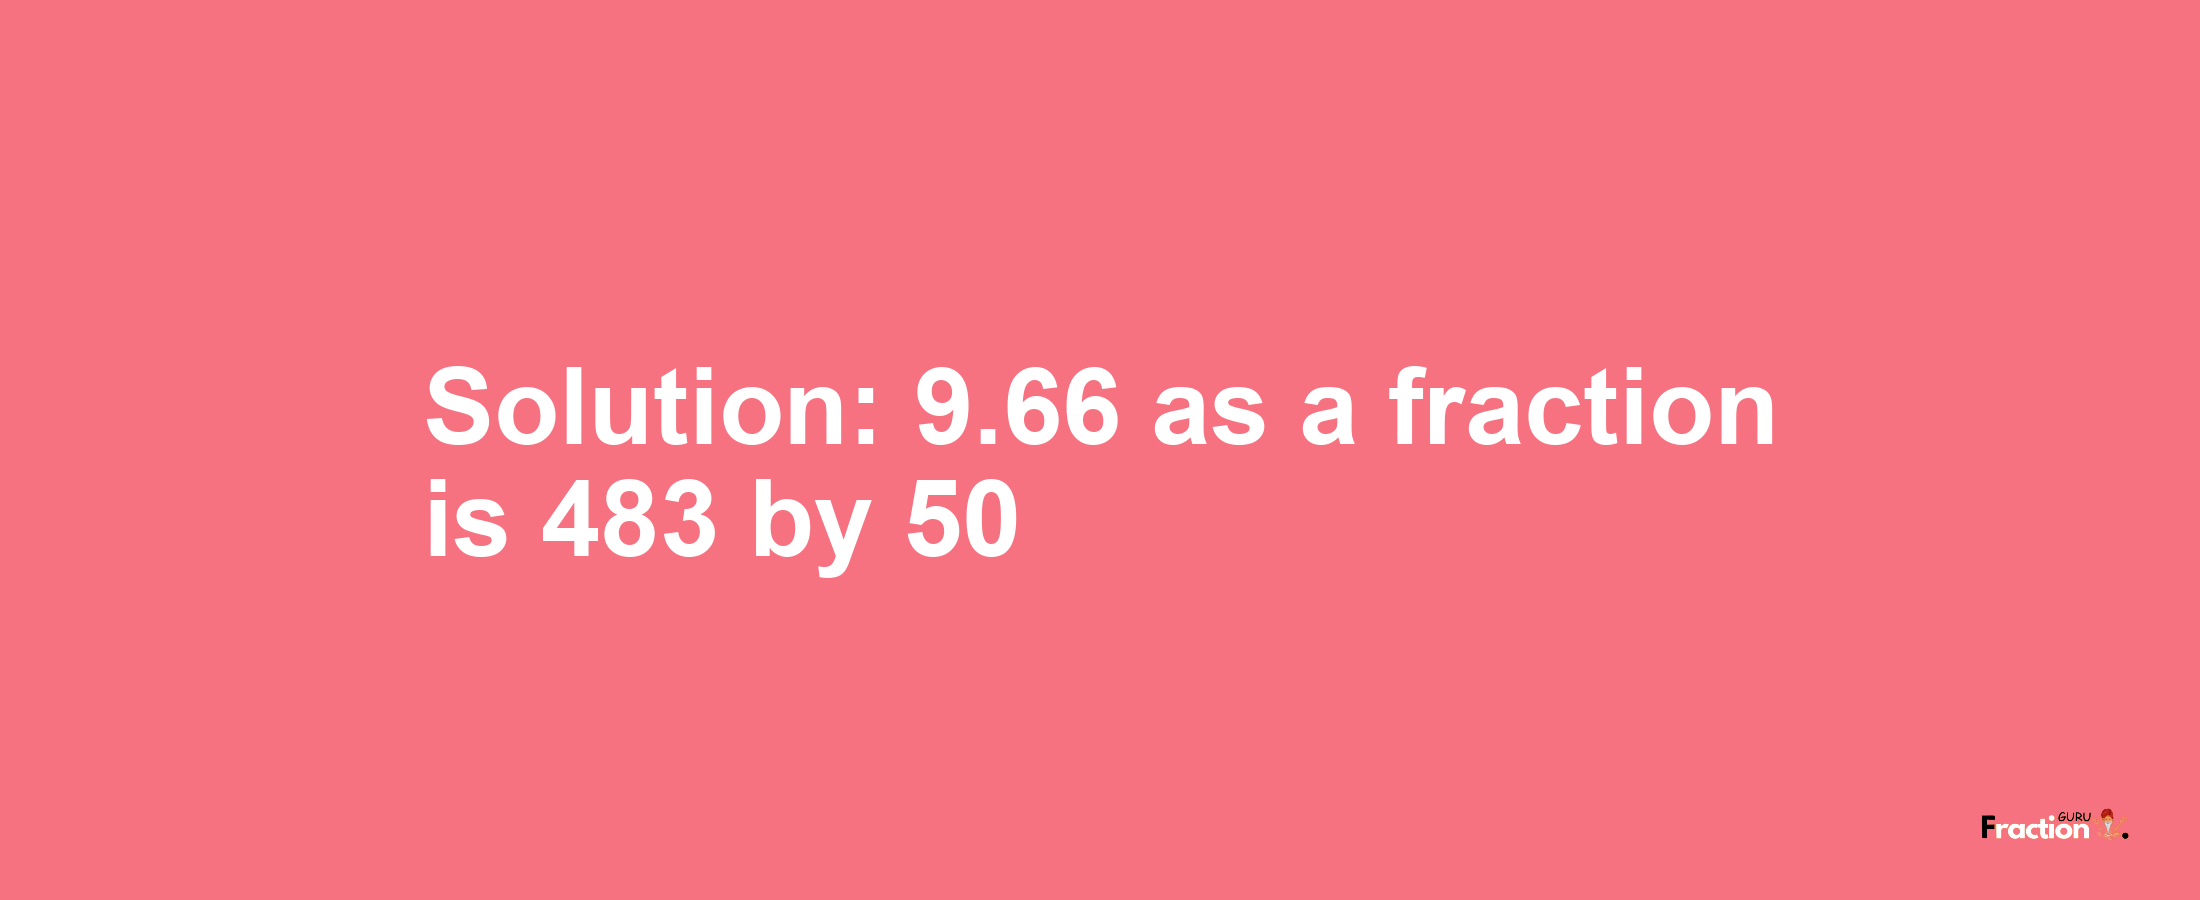 Solution:9.66 as a fraction is 483/50